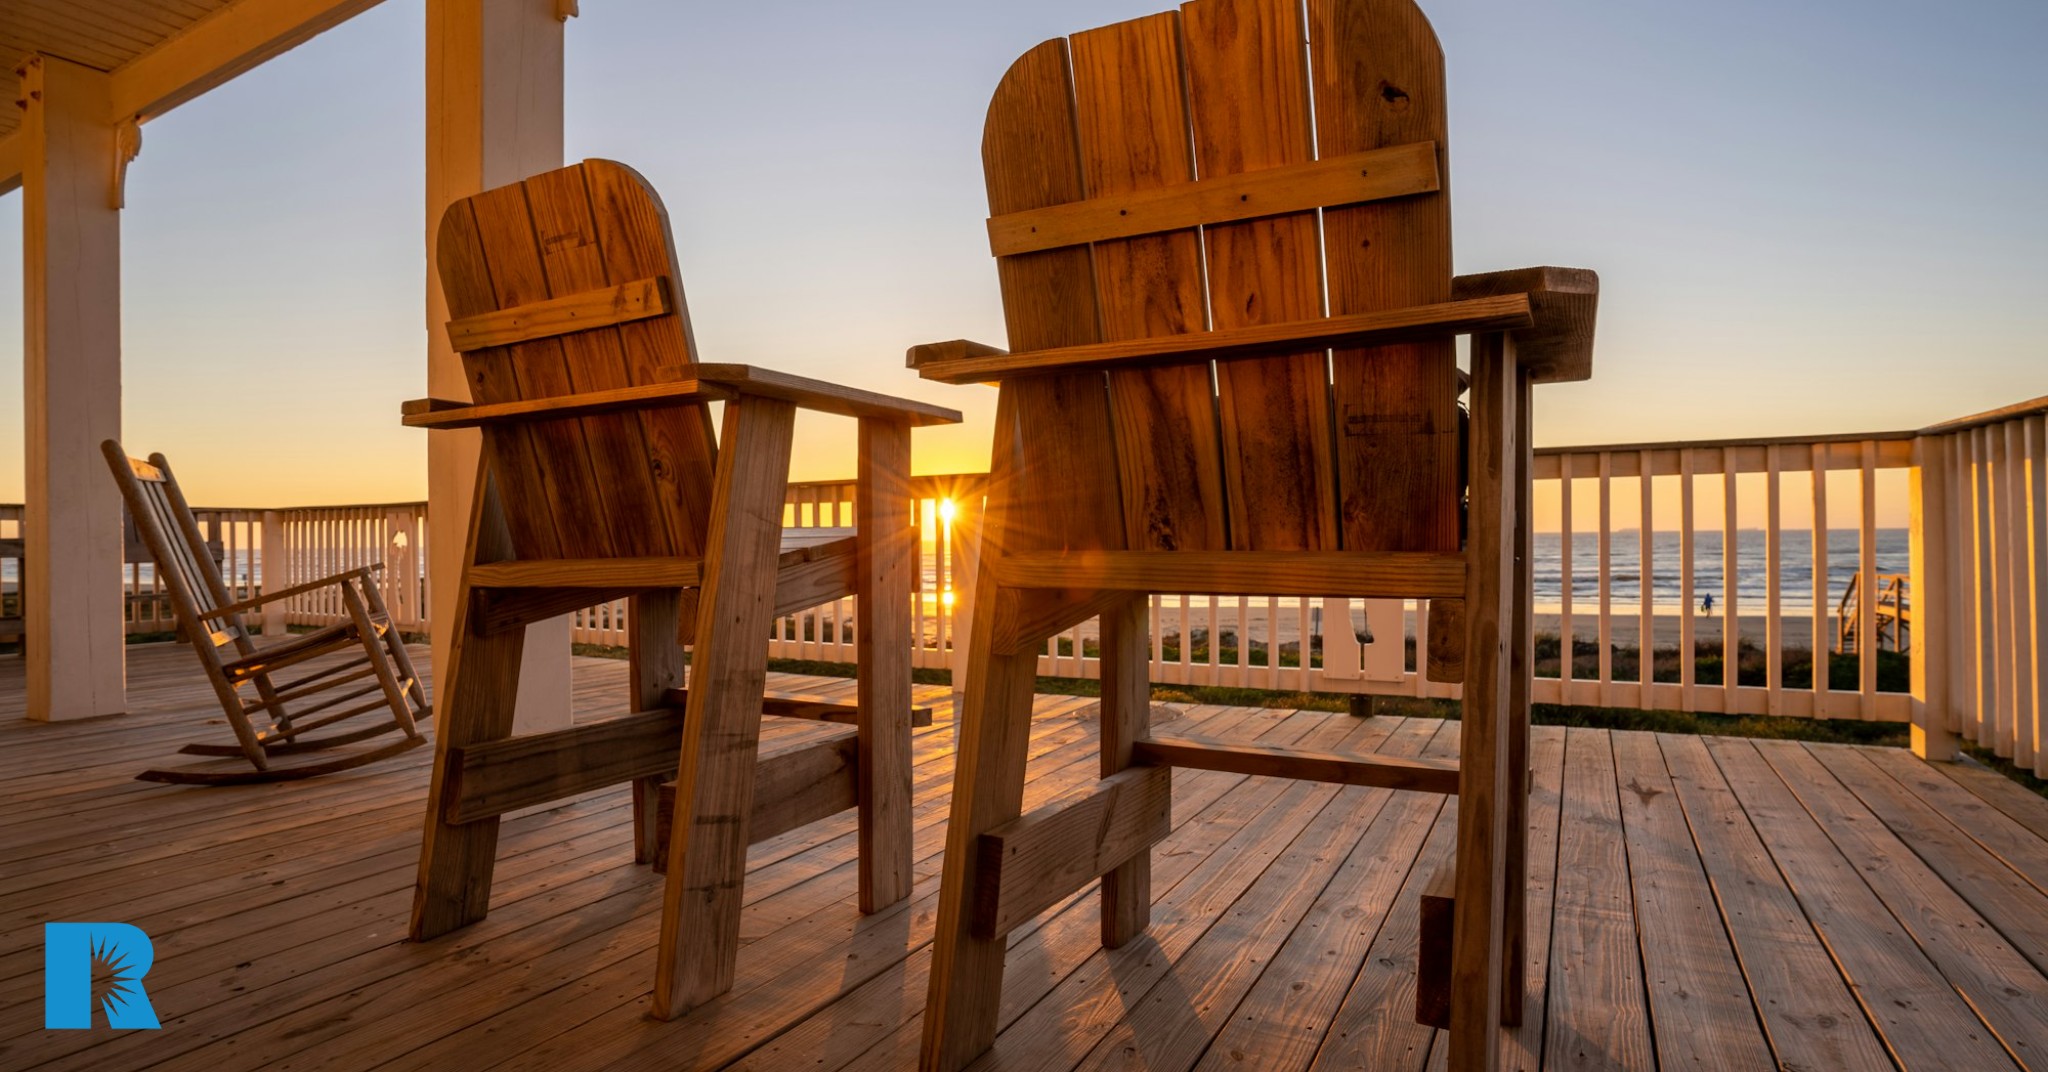 A pair of rocking chairs rest on a front porch as the sun sets.